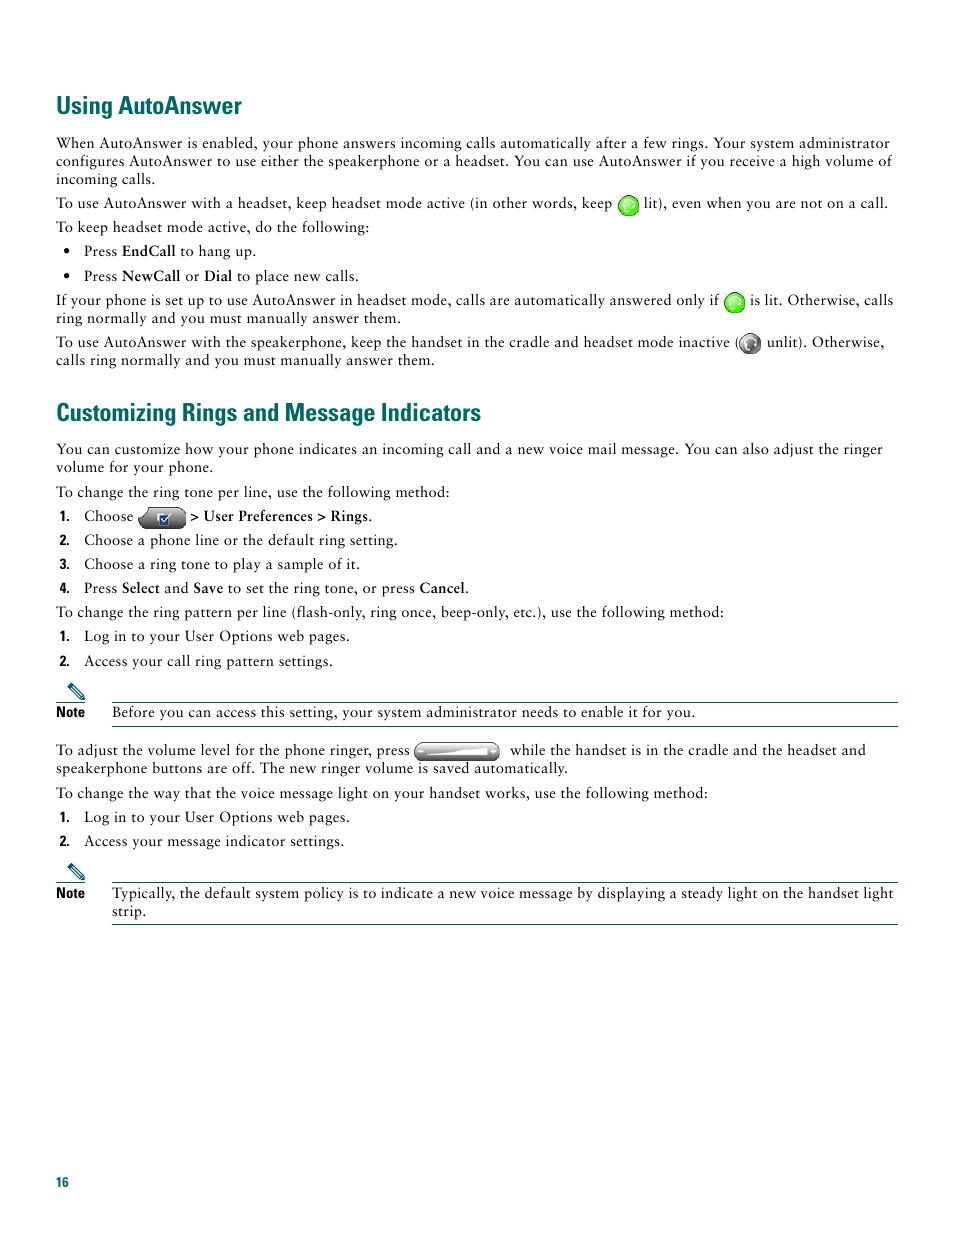 Using autoanswer, Customizing rings and message indicators | Cisco 7970G User Manual | Page 16 / 20